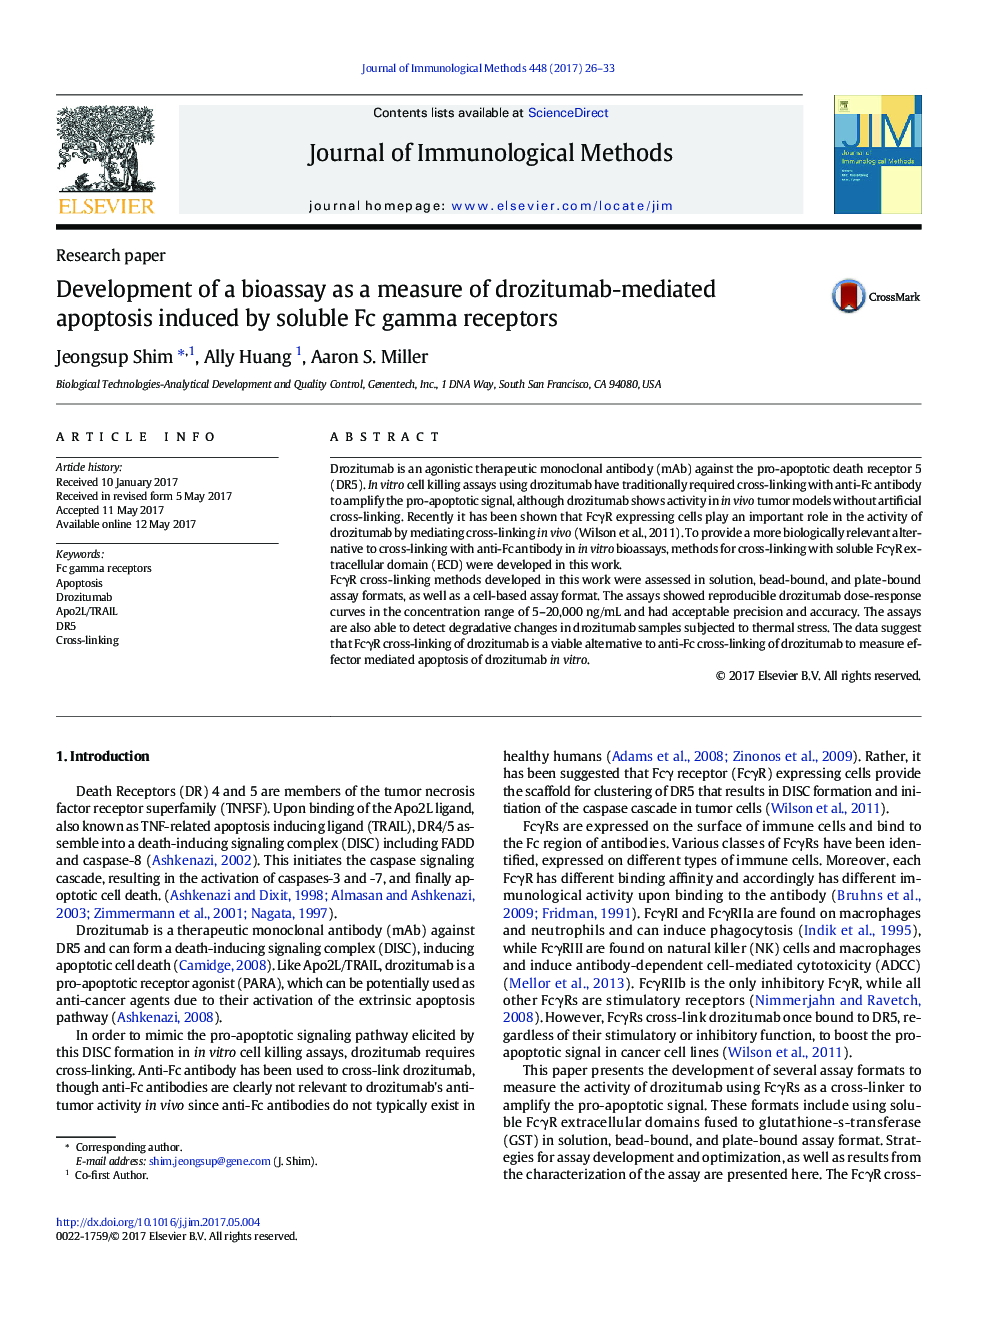 Research paperDevelopment of a bioassay as a measure of drozitumab-mediated apoptosis induced by soluble Fc gamma receptors